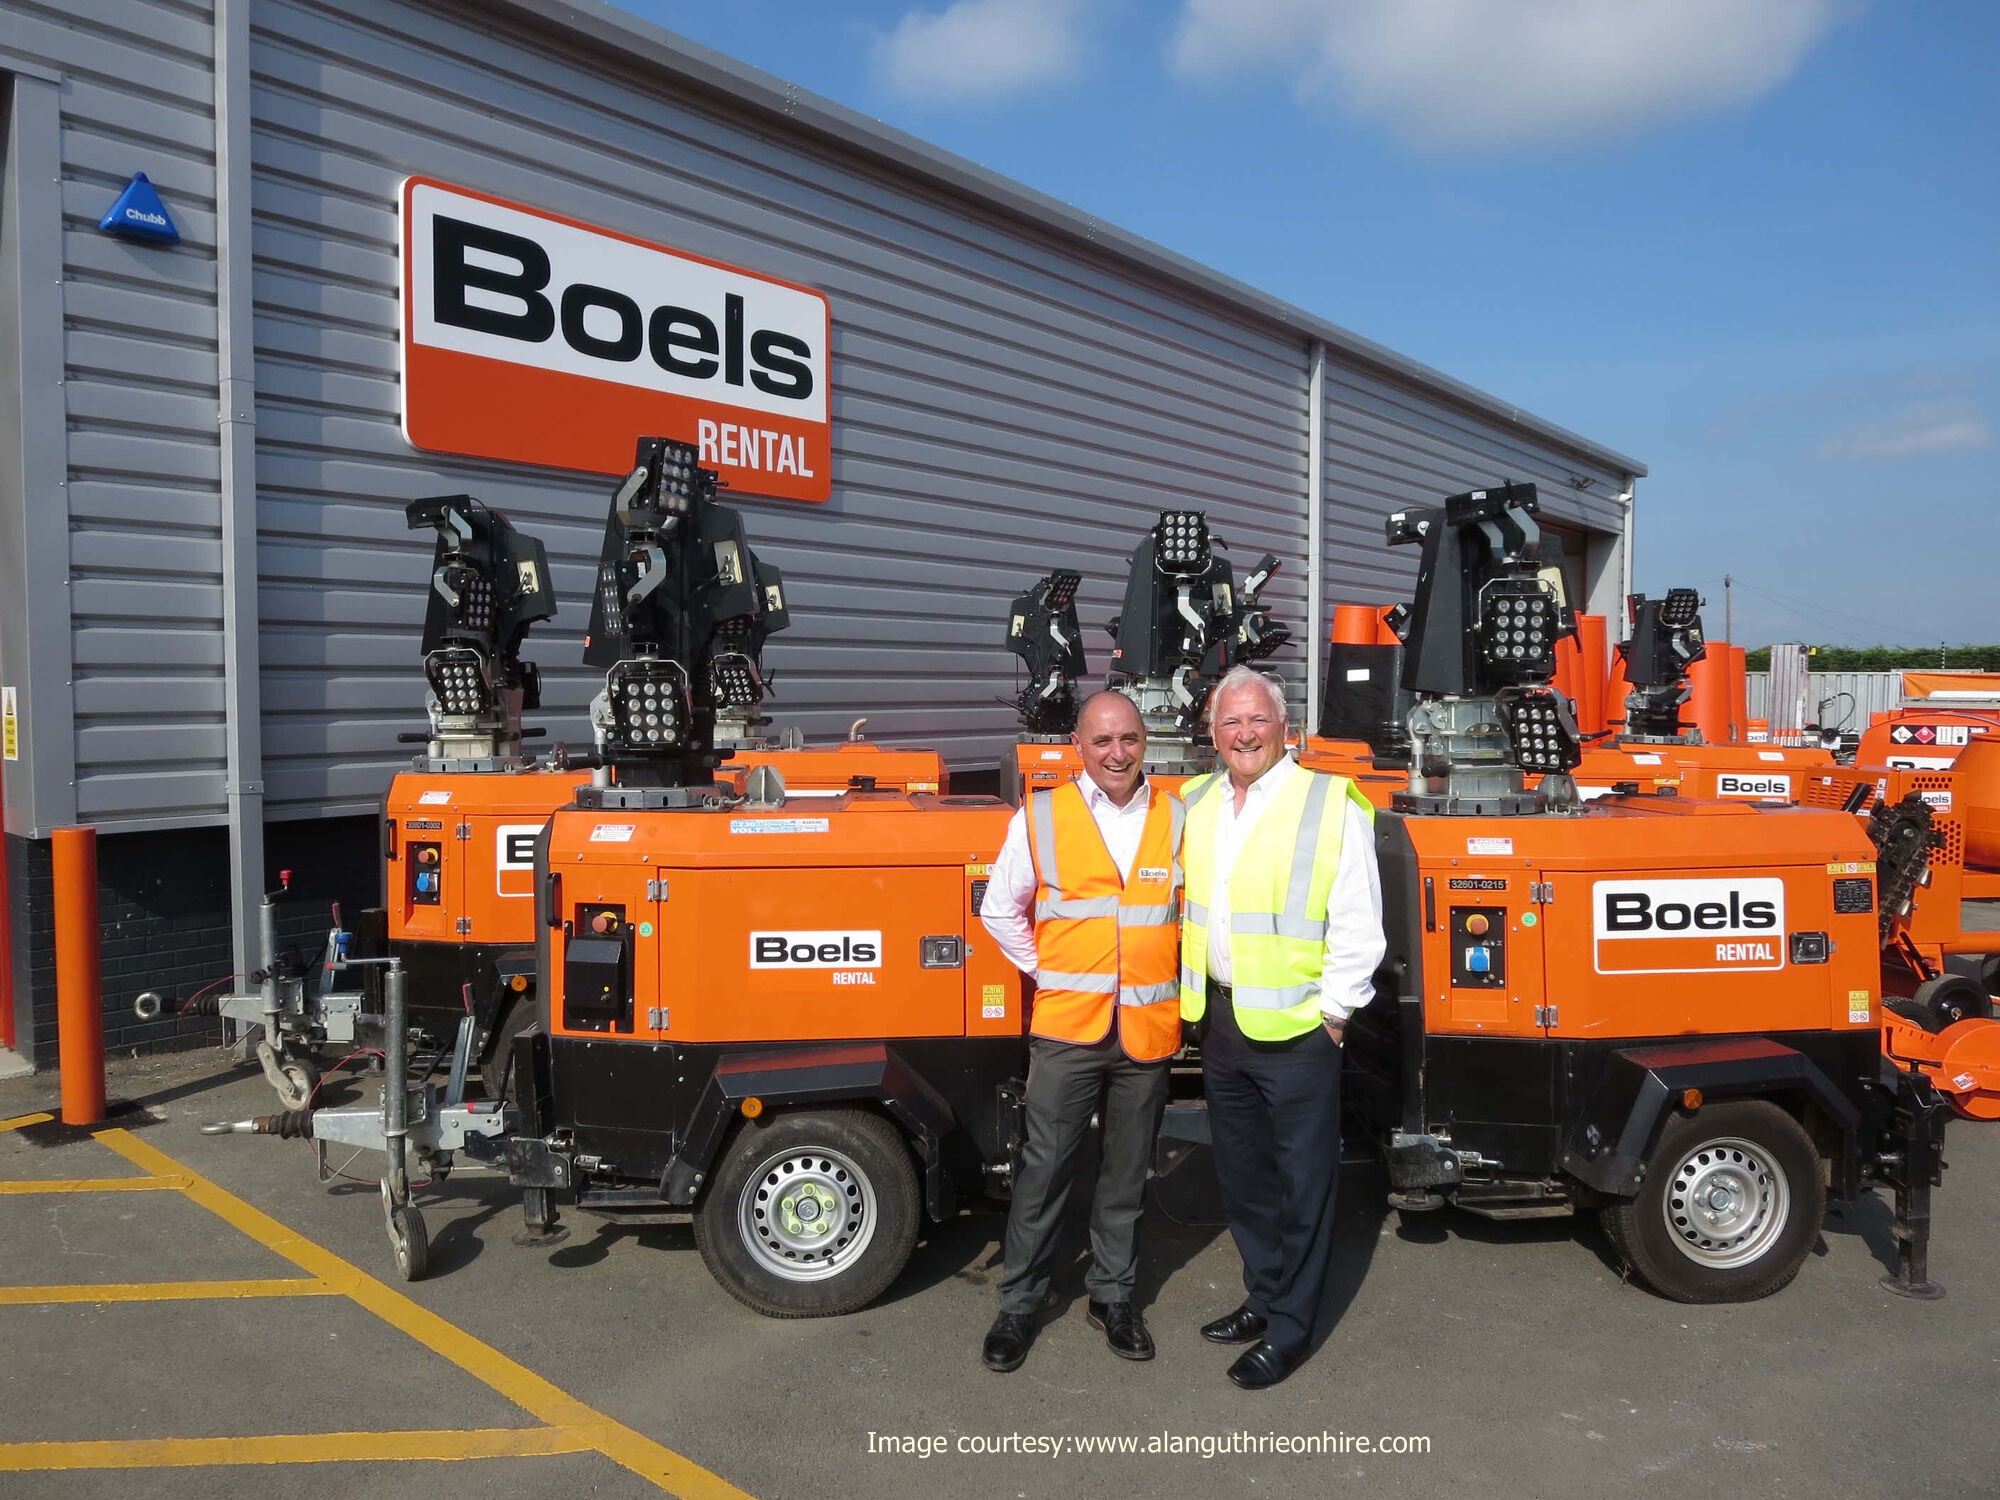 Boels Rental invests in our lithium-powered lighting towers